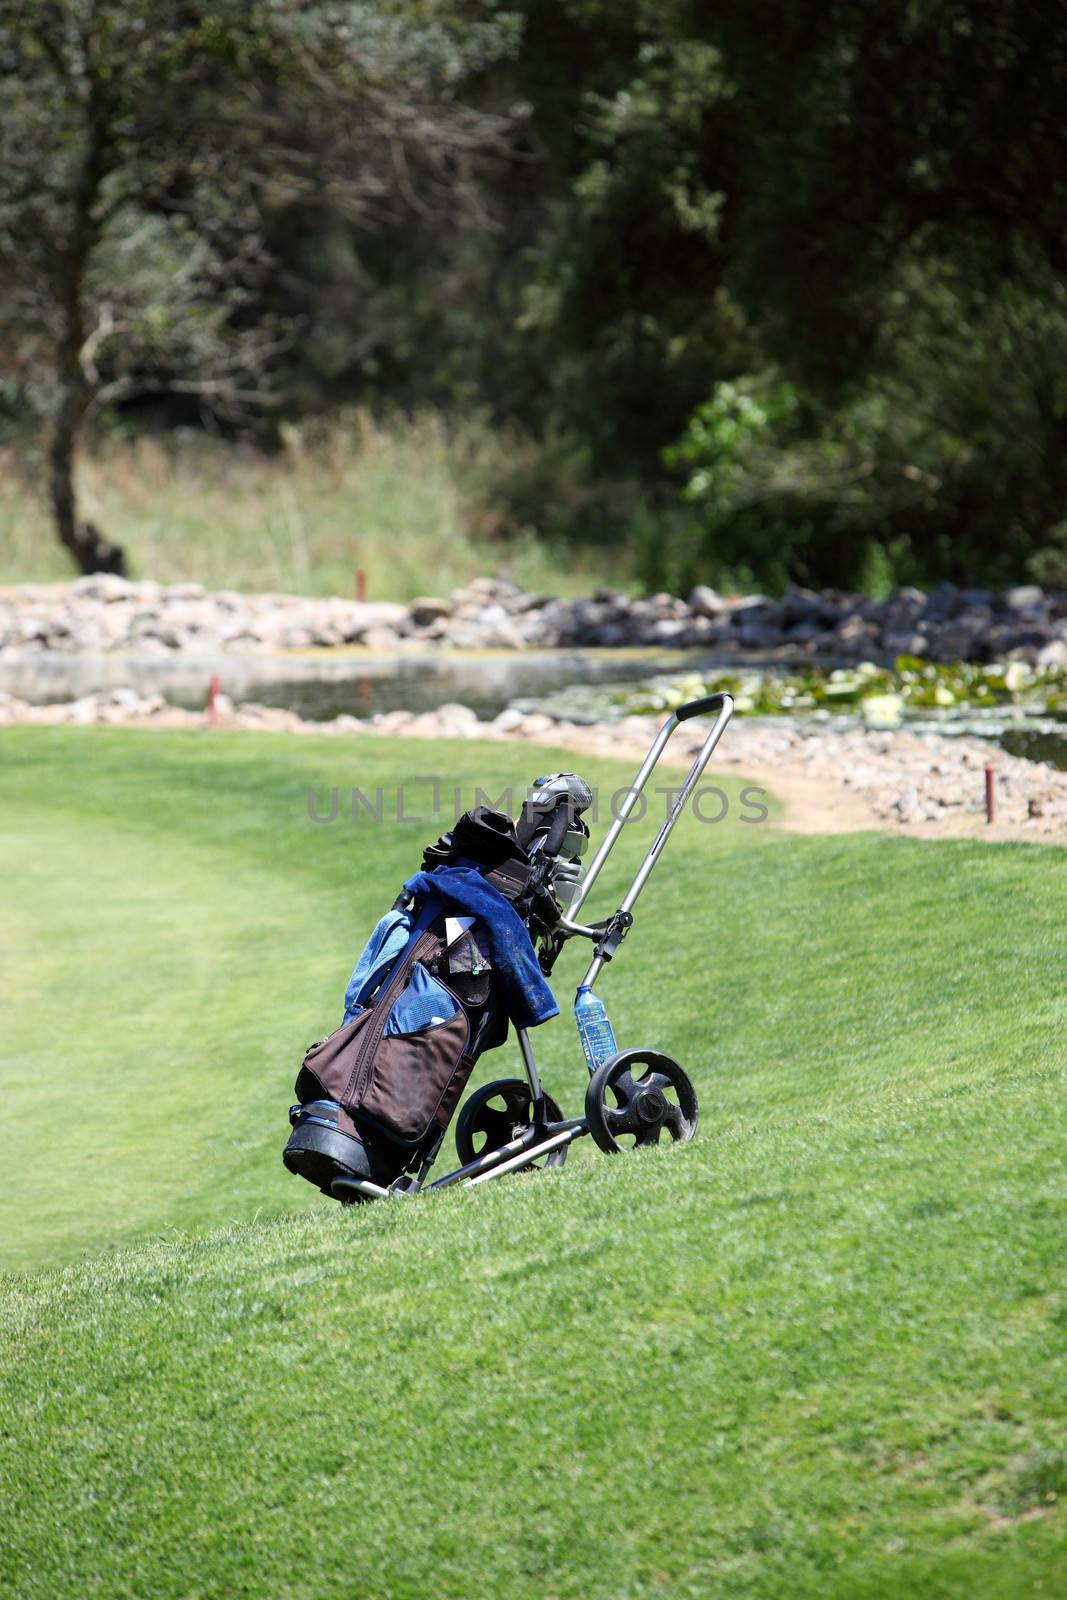 Golf bag and clubs on a golf course by Farina6000